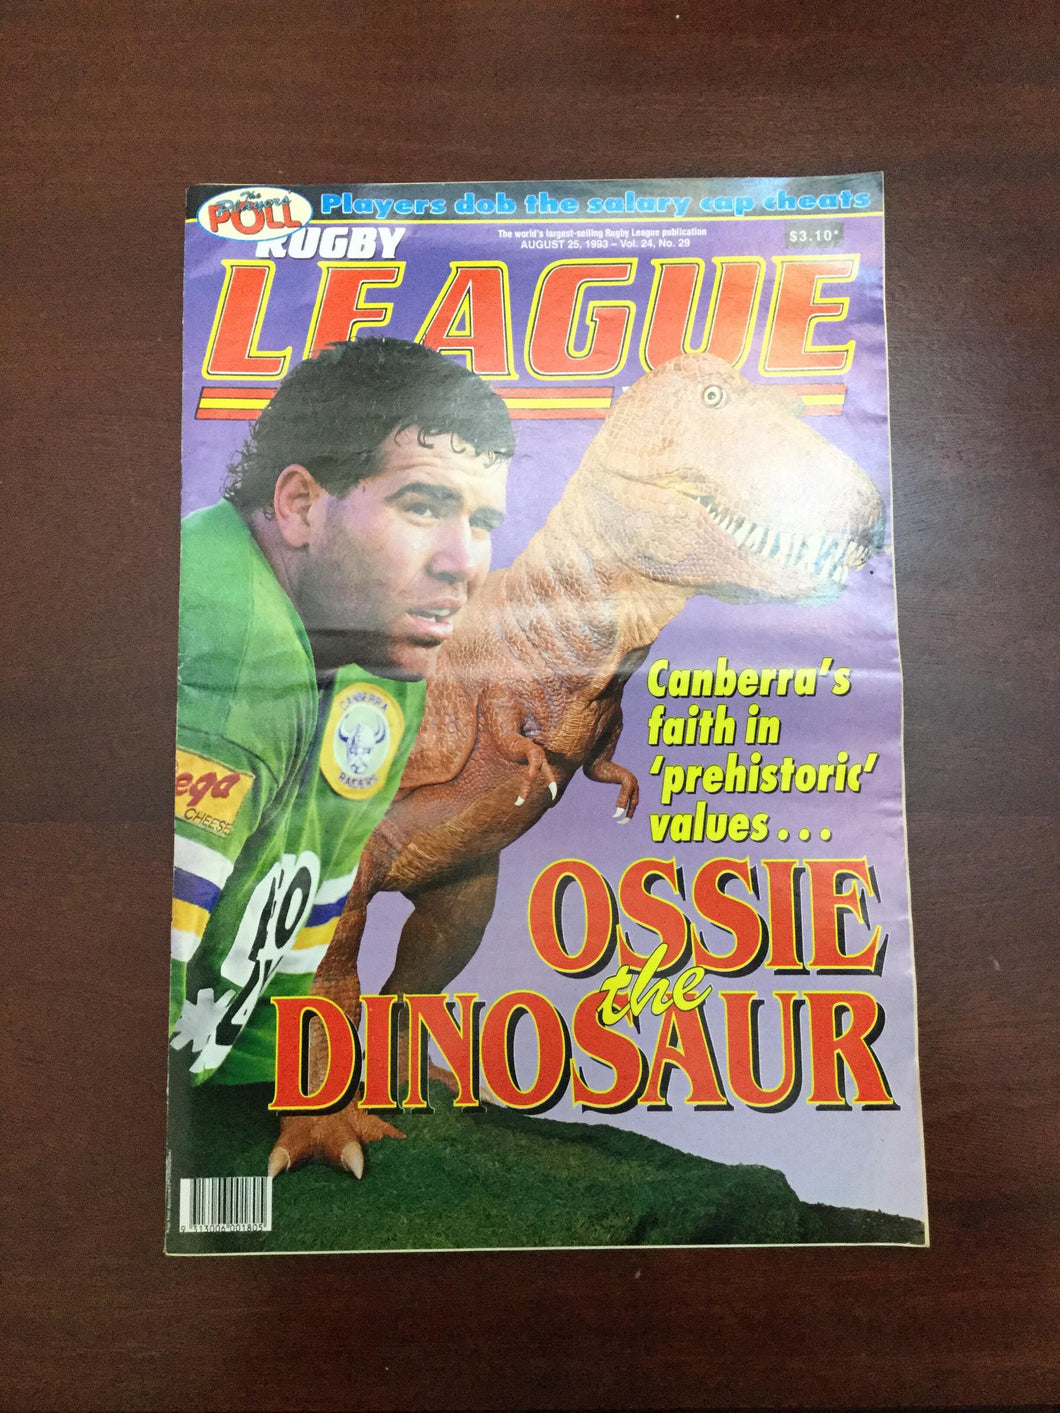 1993 Rugby League Week Magazine August 25 1993 - Vol 24 No. 29